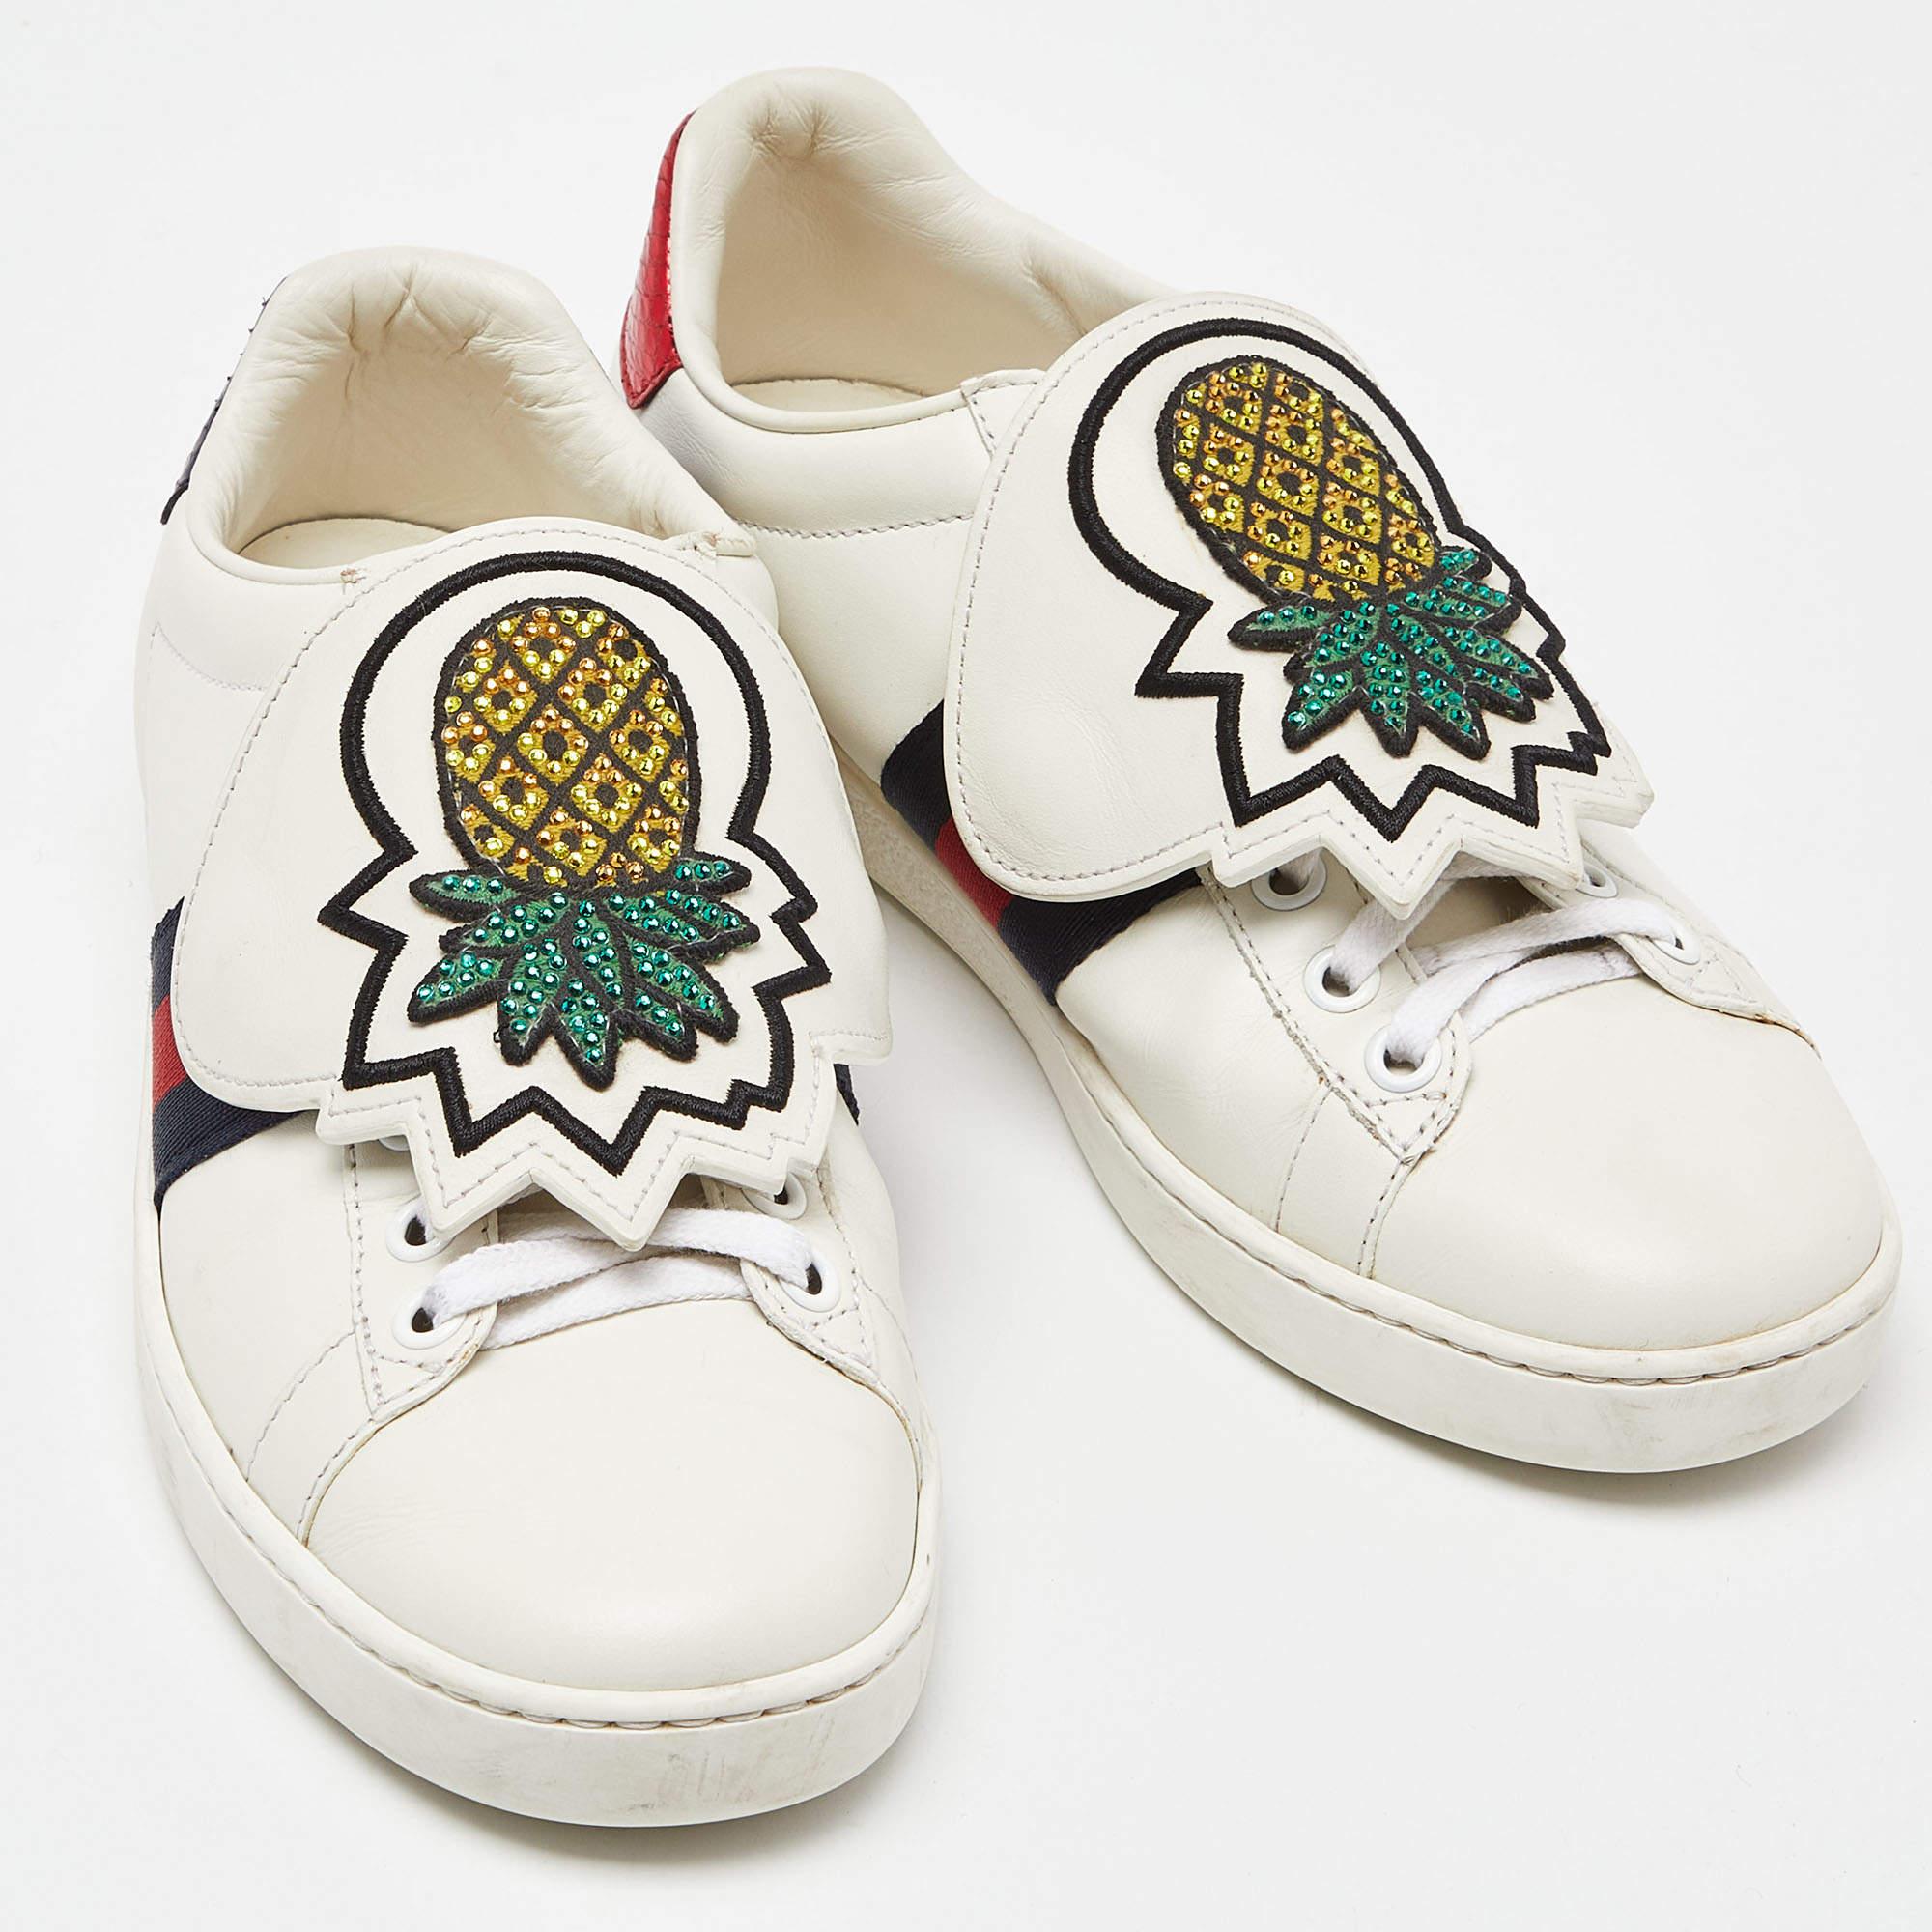 Gucci White Leather Embellished Pineapple Strap Ace Sneakers Size 35 For Sale 4